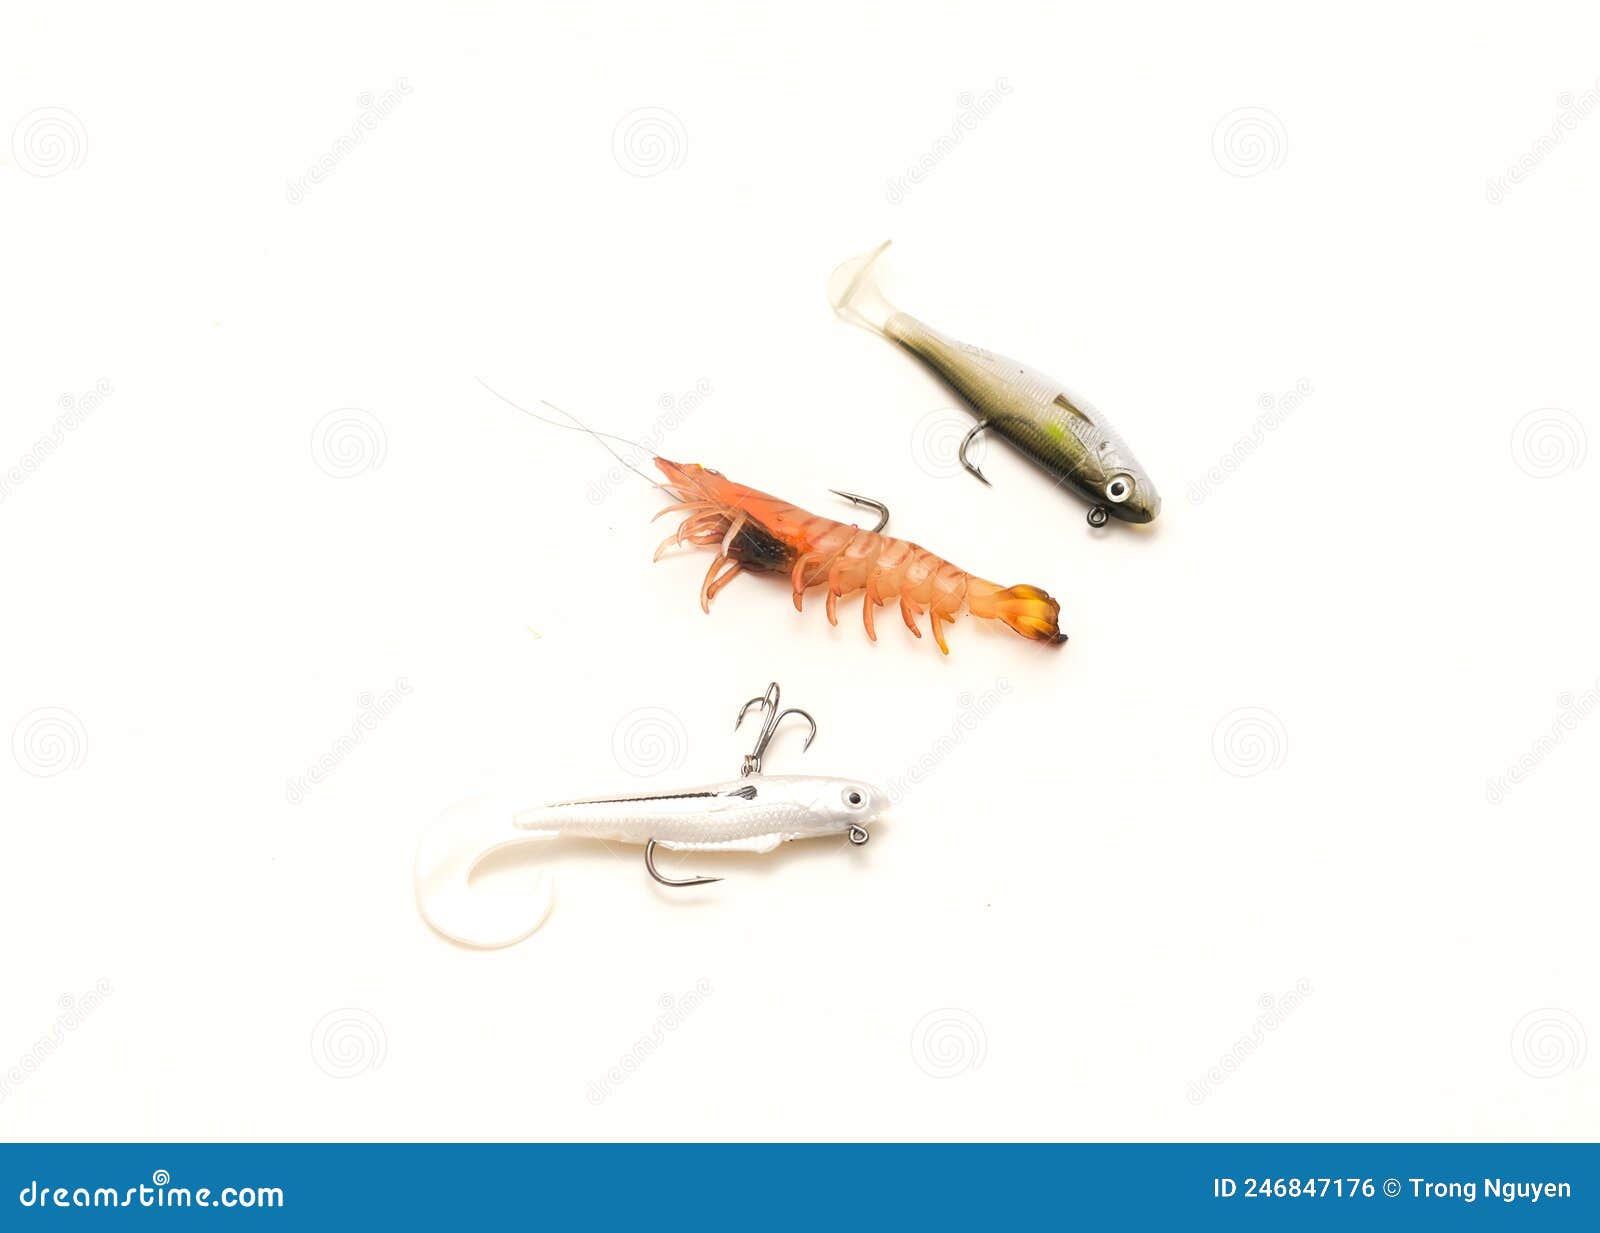 Three Jig Head Soft Swimbait, Paddle Tail and Shrimp Lure Isolated on White  Stock Photo - Image of accessories, lure: 246847176